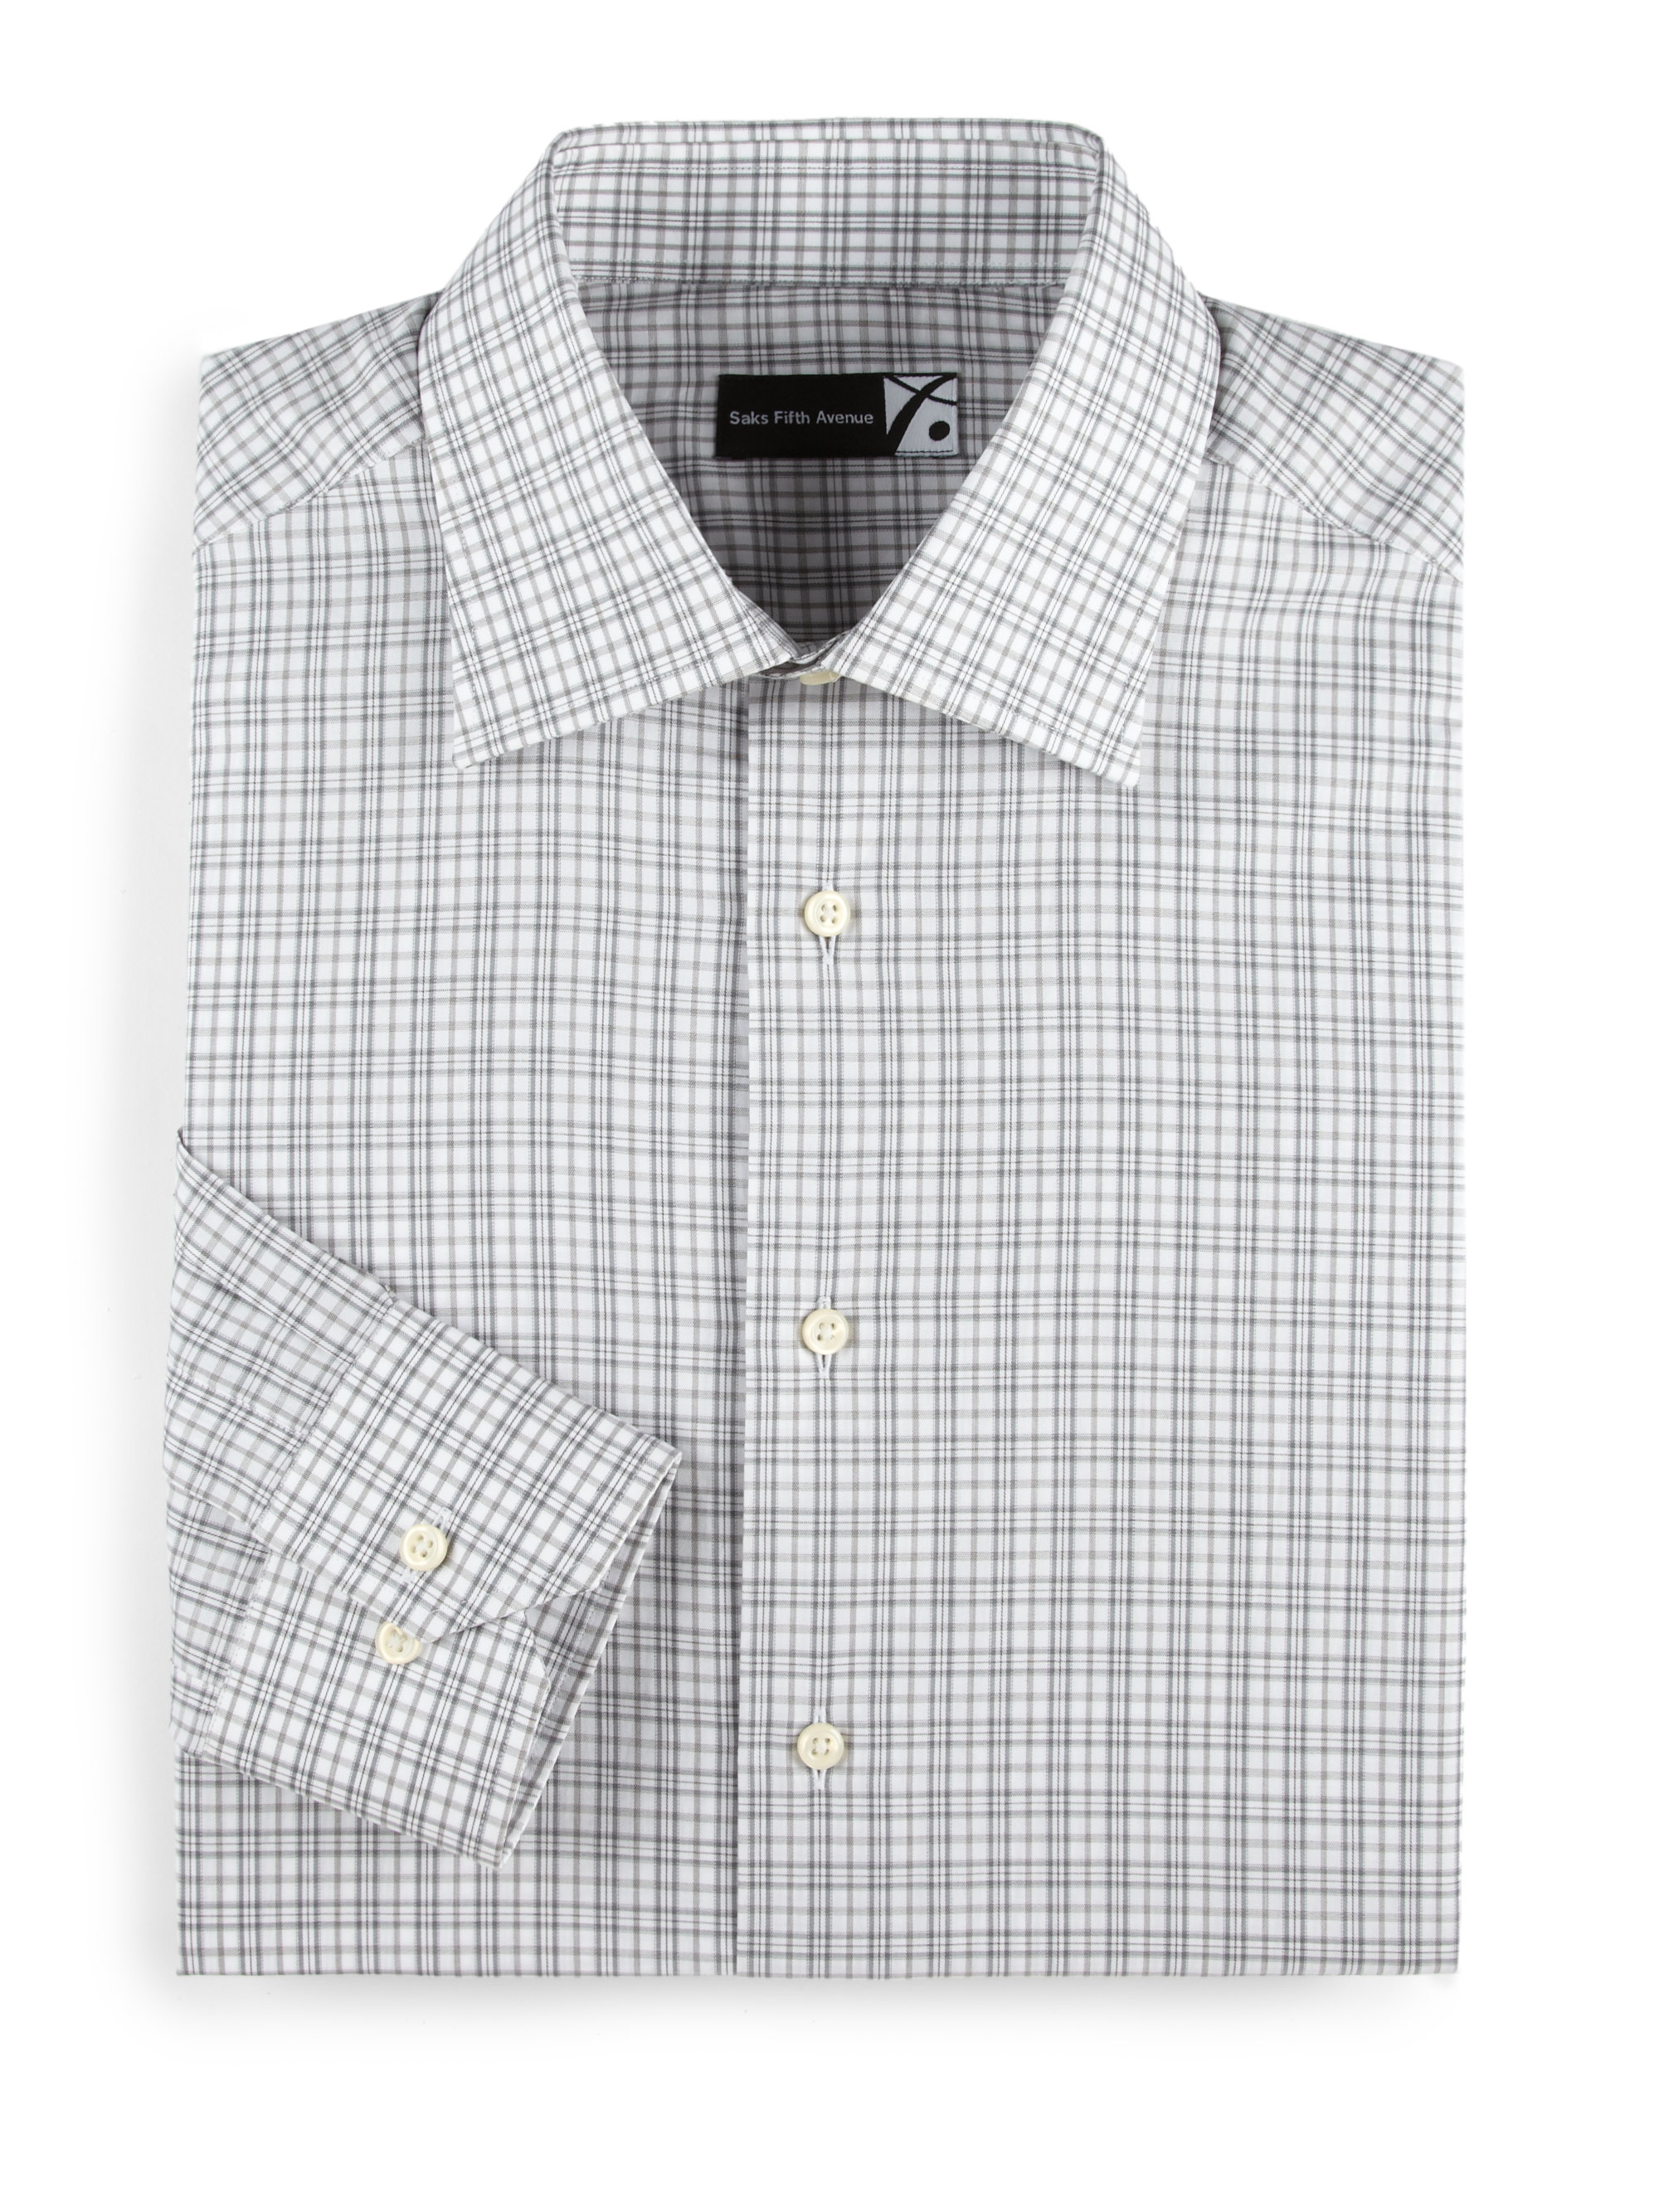 Saks Fifth Avenue Men Collection Plaid Check Cotton Dress Shirt in Gray ...